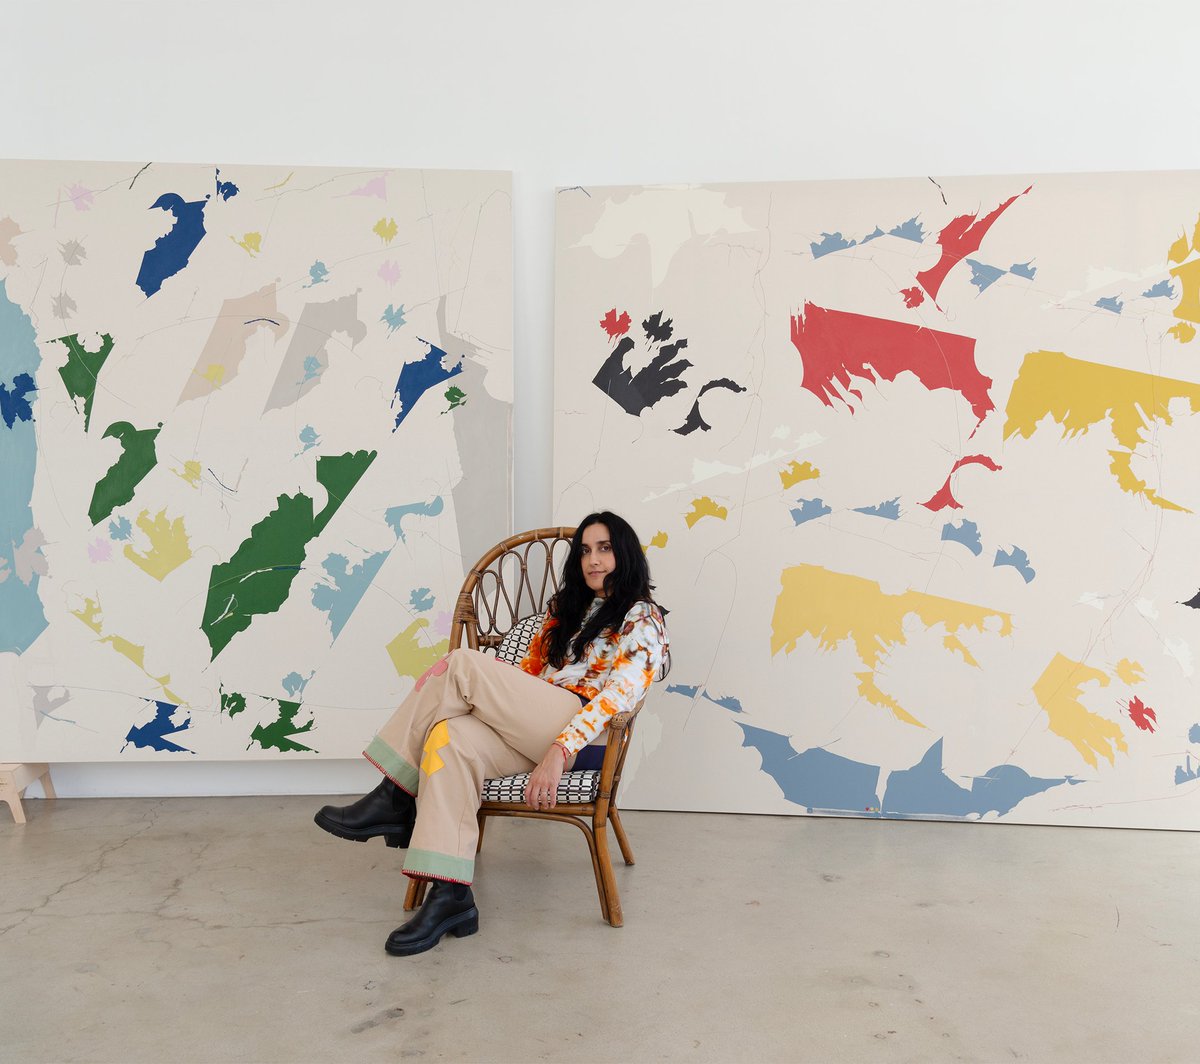 Mark your calendars: ‘Mute Counsel,’ a pop-up exhibition featuring nine new paintings by Pace artist #MayshaMohamedi, opens this Saturday, April 27 during #GalleryWeekendBerlin. Join us for the opening reception Friday, April 26 from 6-8pm. Learn more: bit.ly/3TFsgdr